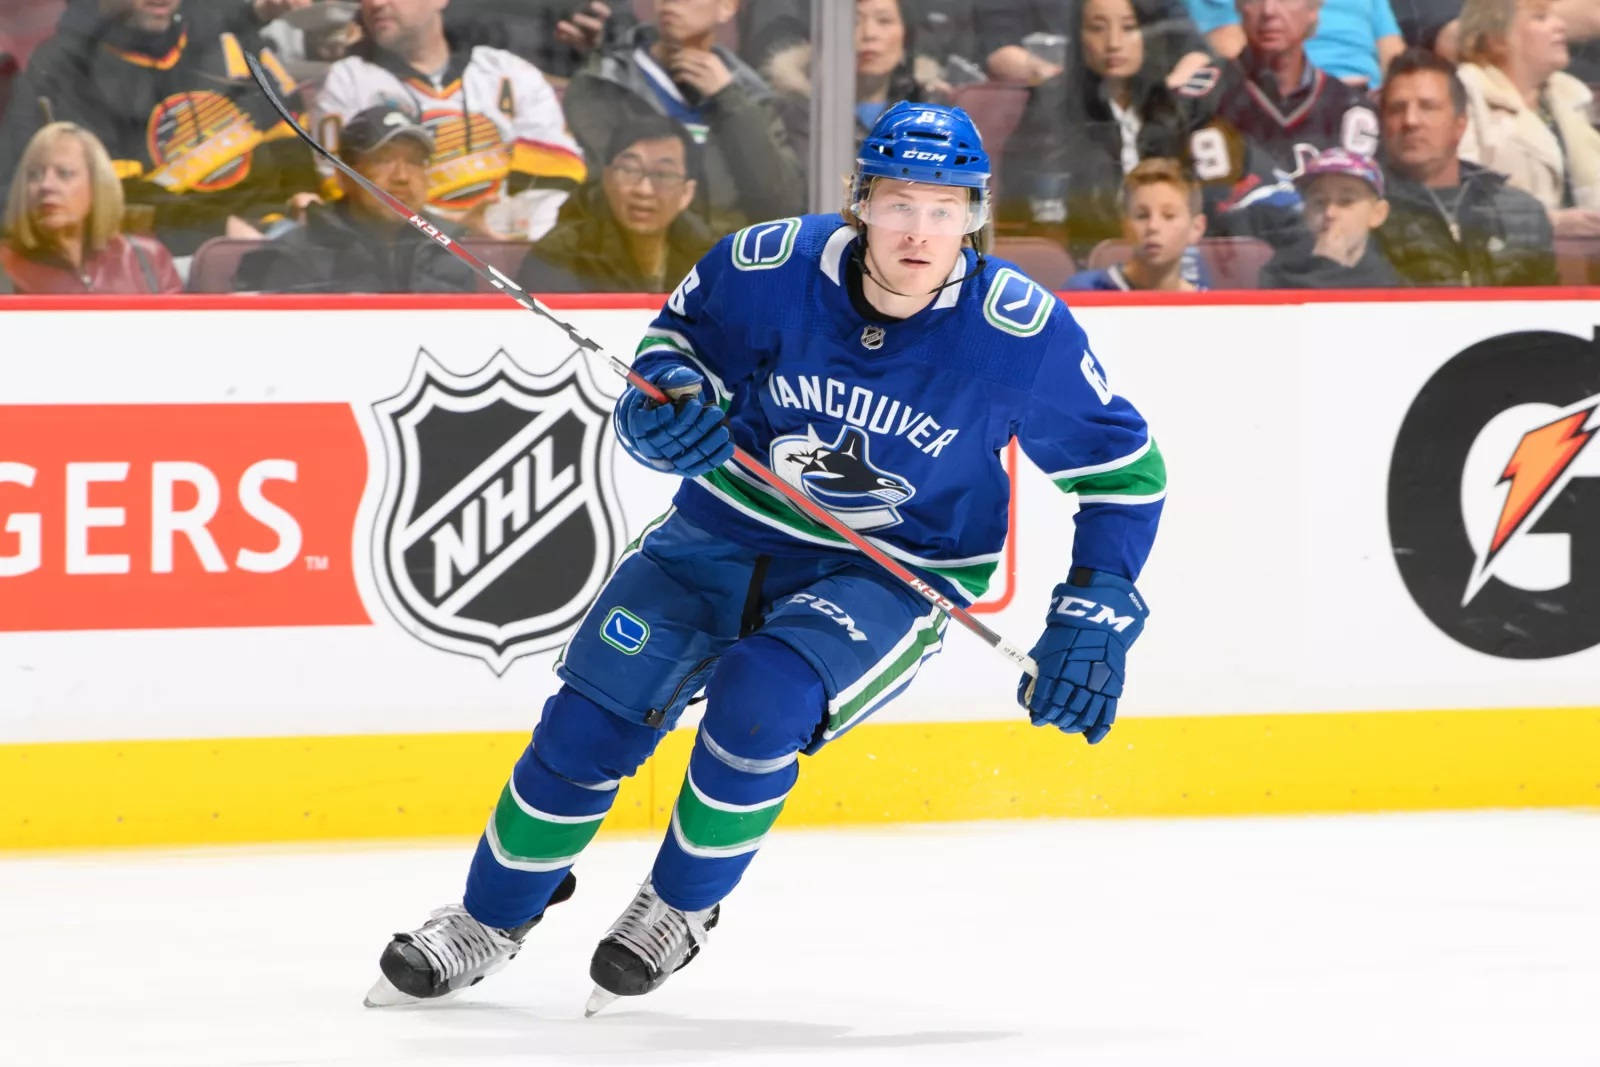 Download Dynamic And Focused Brock Boeser In Action During 2018 Nhl Game Wallpaper